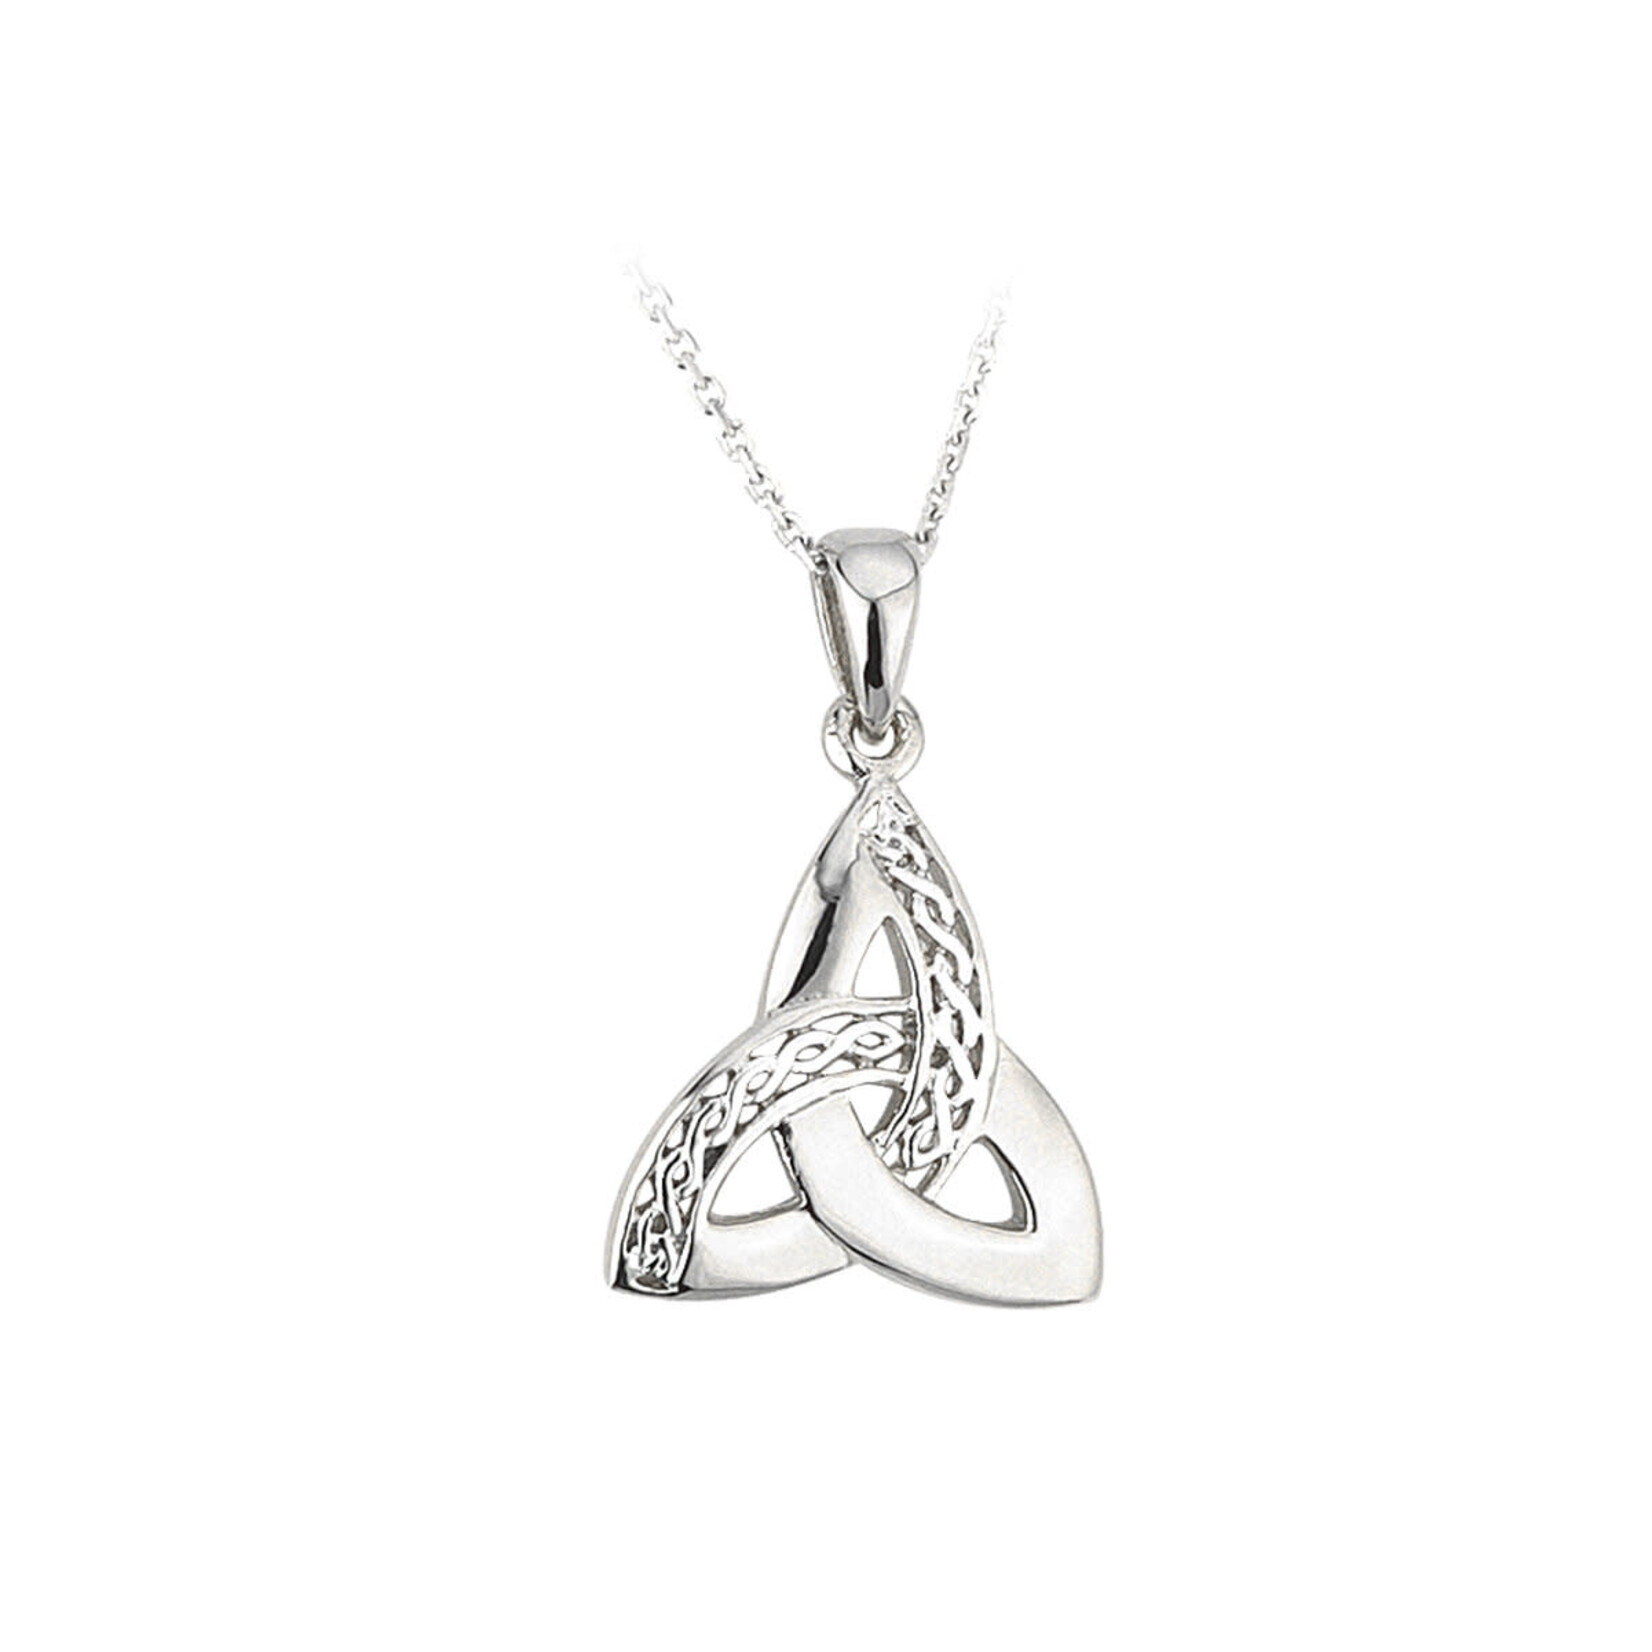 Solvar S/S Etched Trinity Knot Necklace